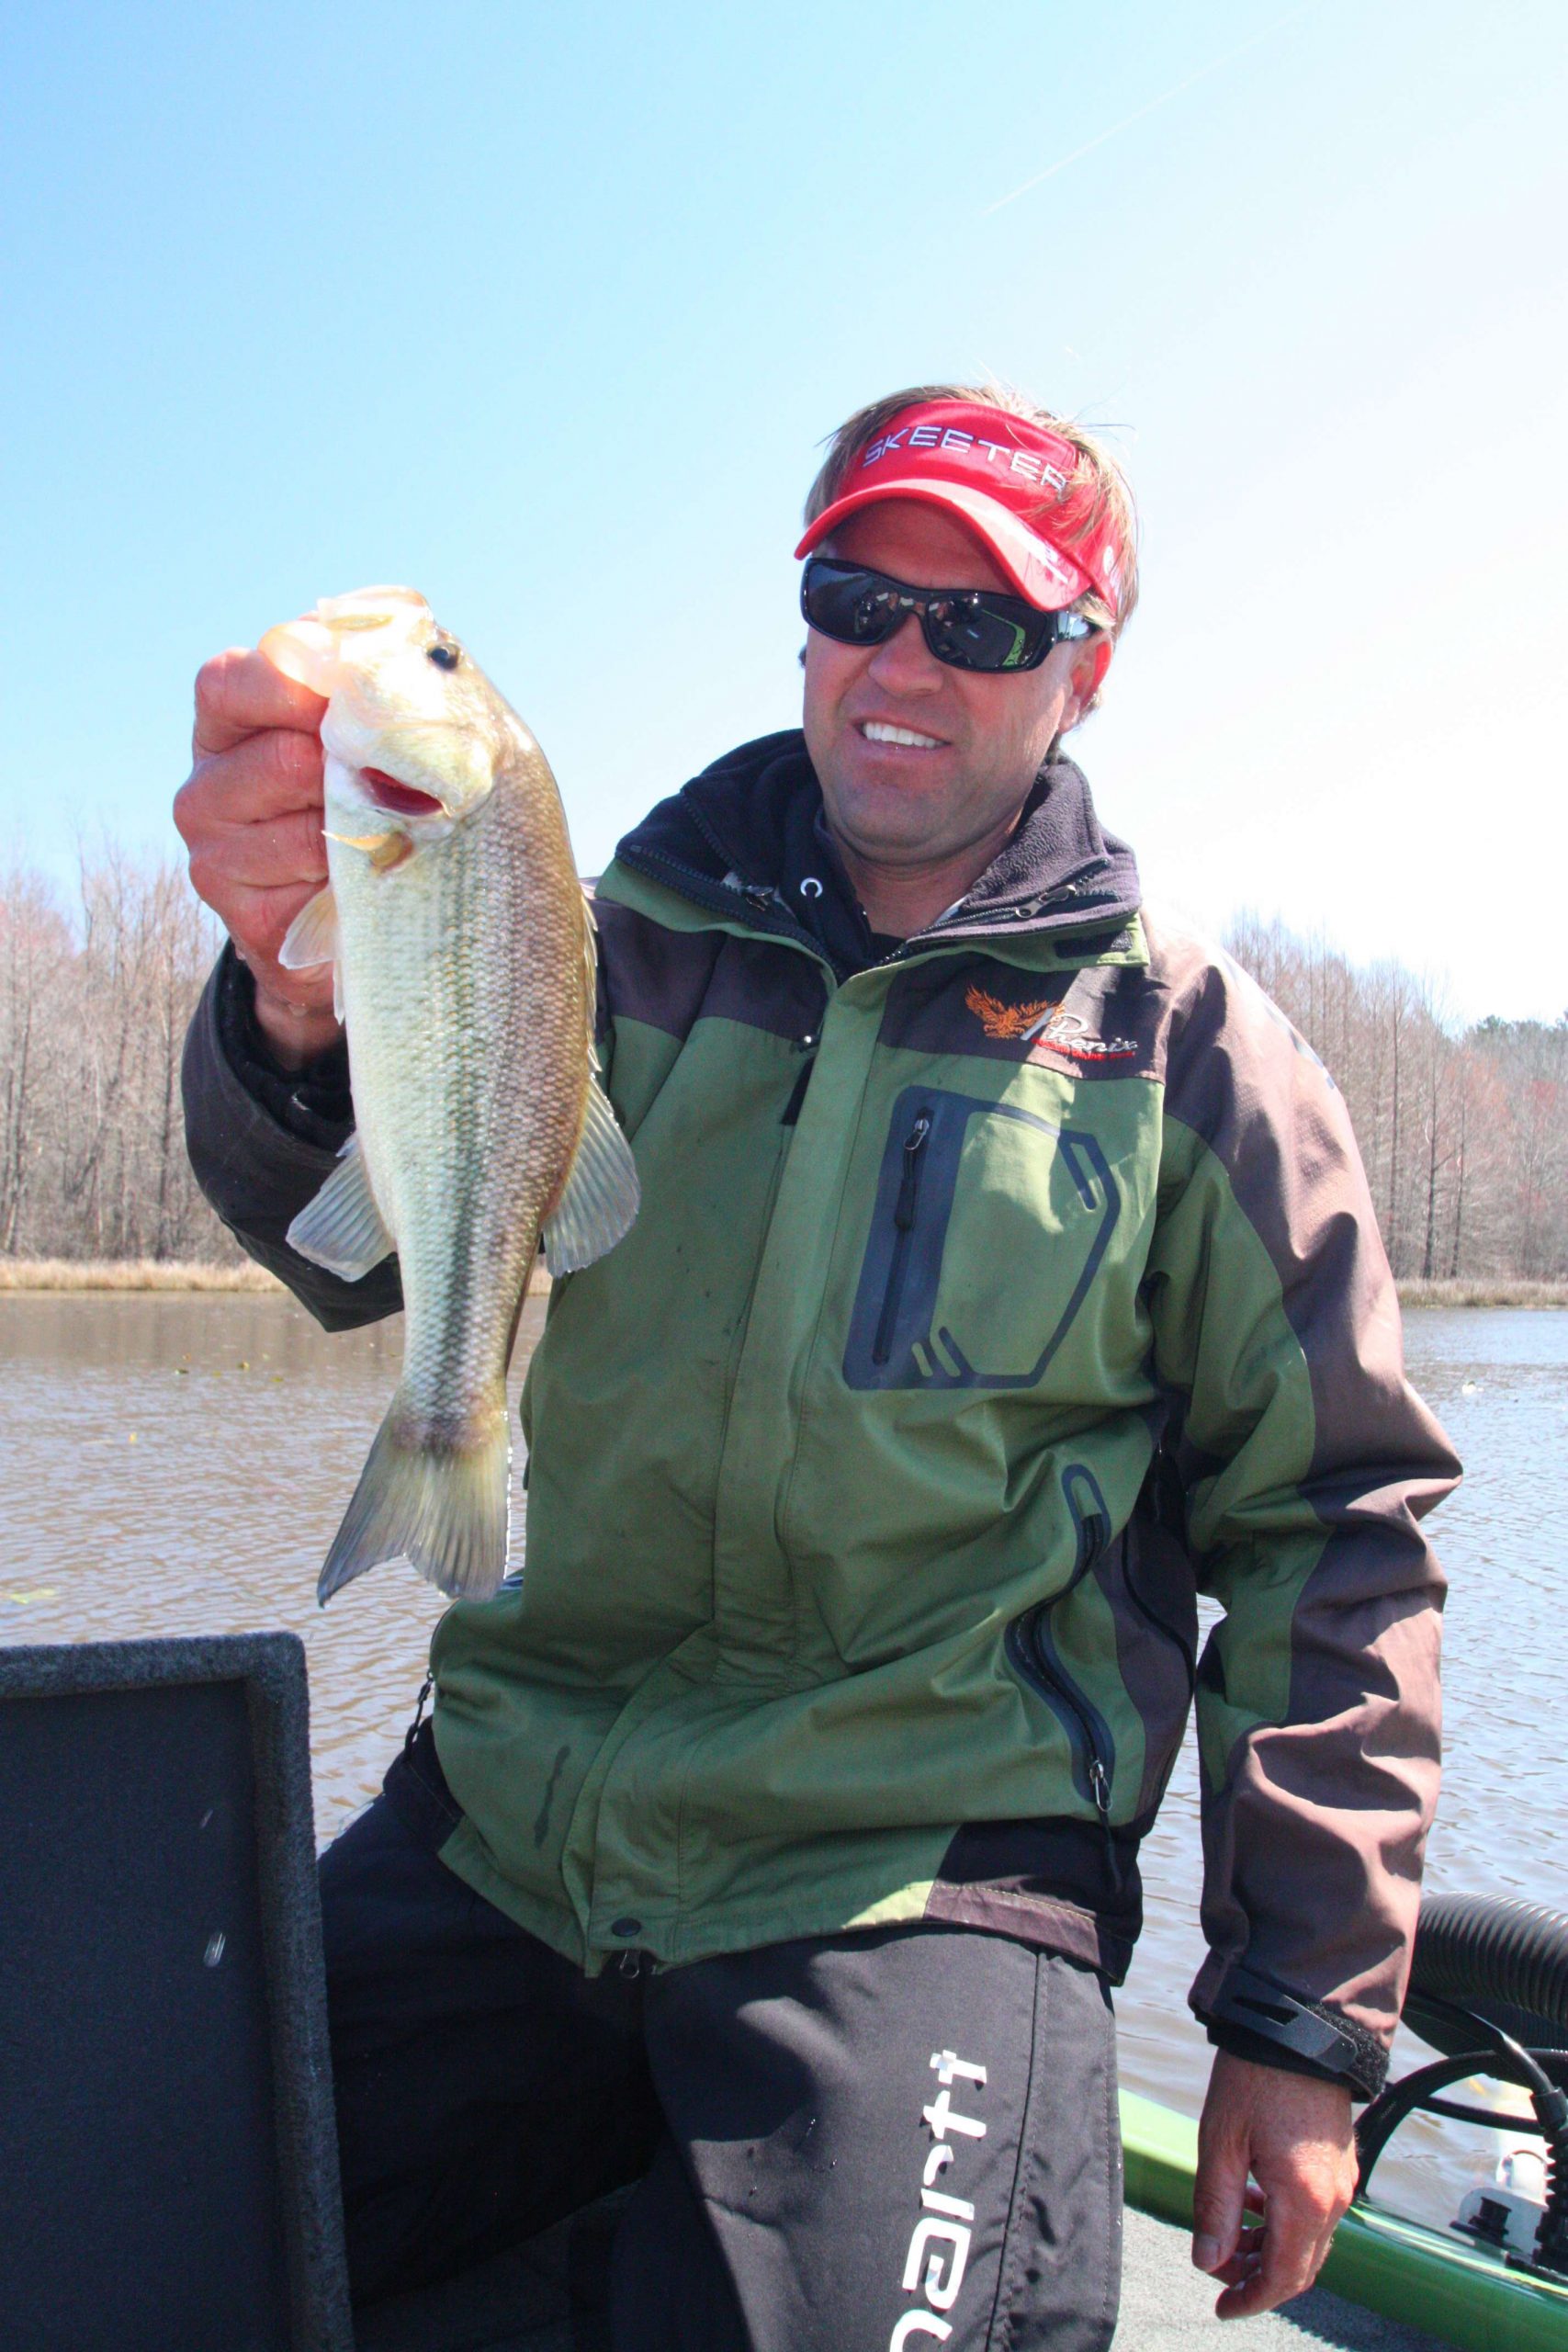 11:20 a.m. Shortly after relocating to the upper end of Lake J, Pirch bags a 1 1/4-pound keeper on a football jig. 